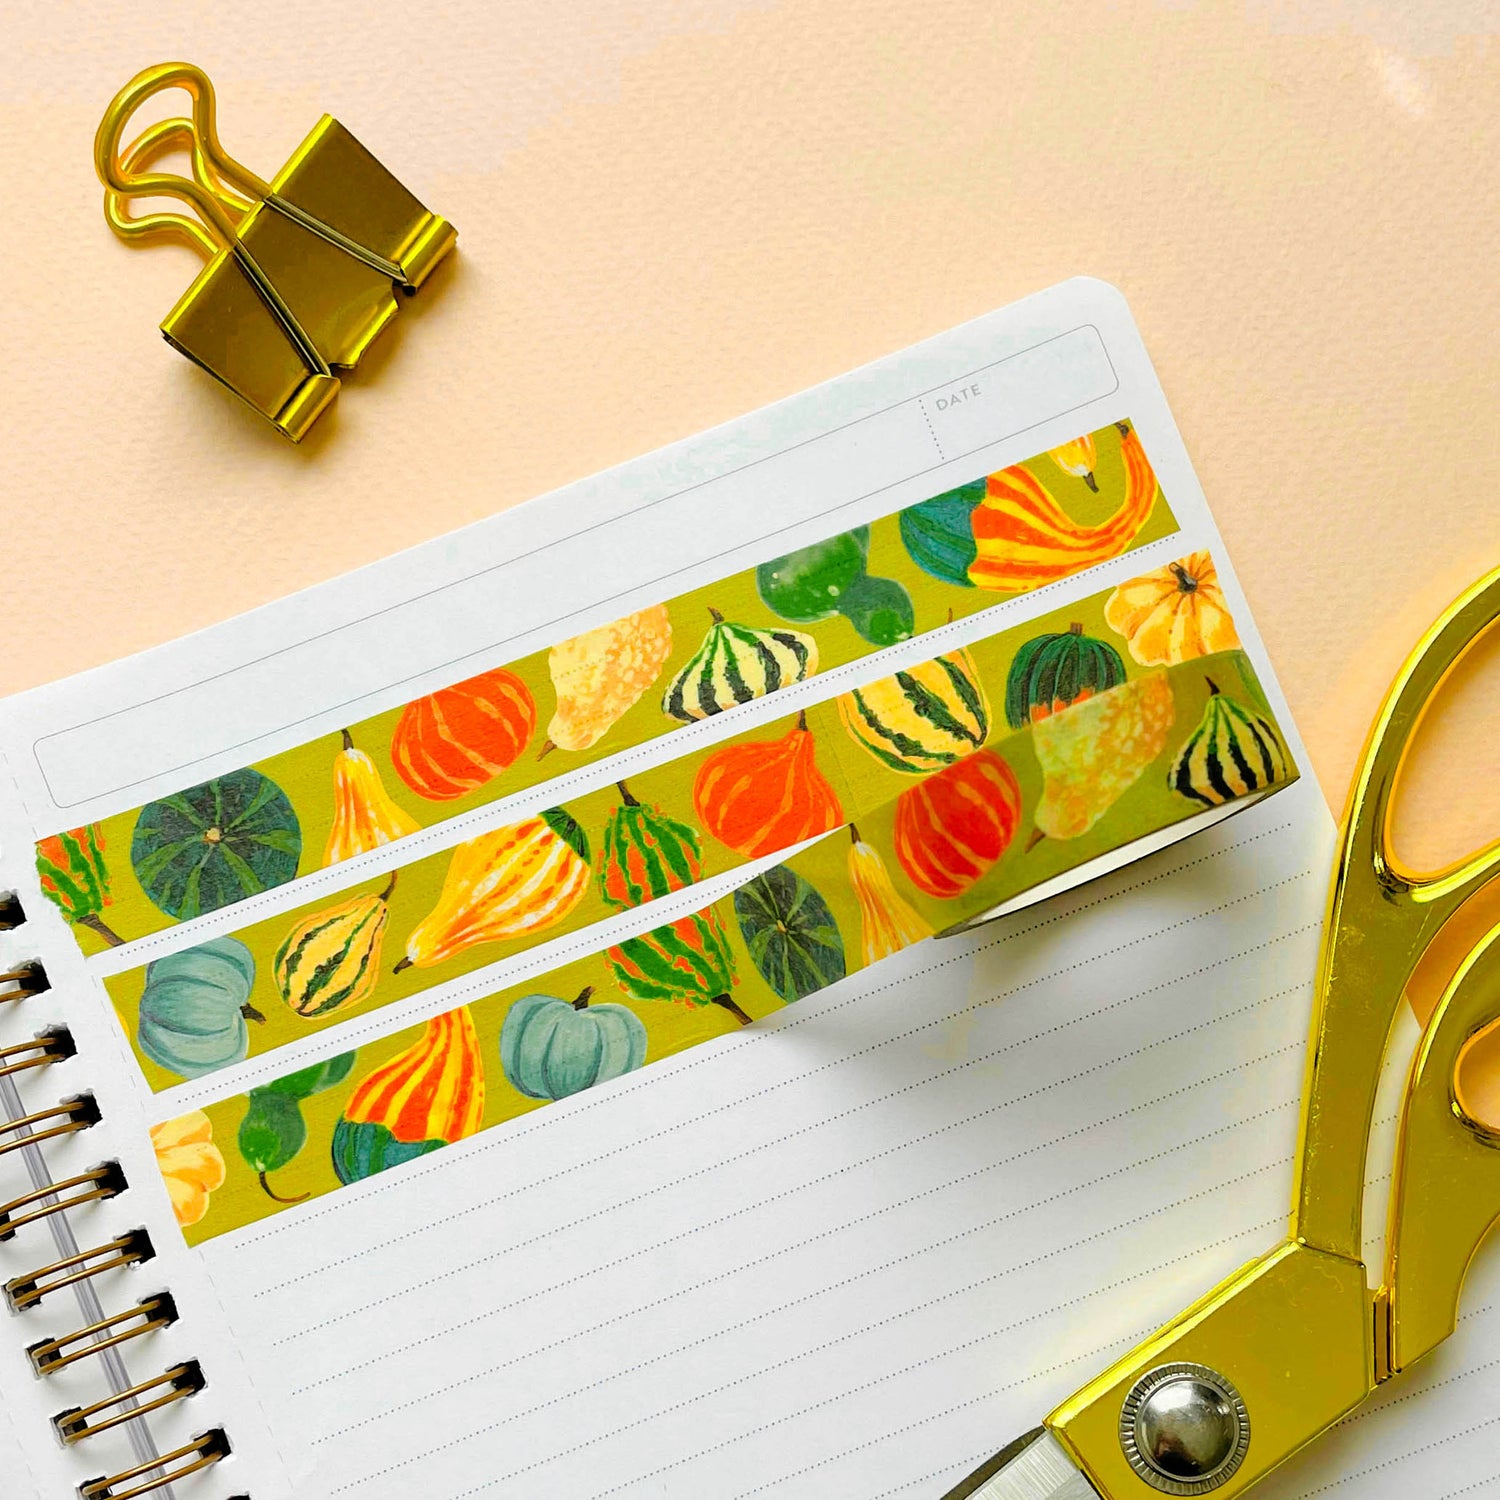 Harvest Pumpkin washi tape with scissors and paper clip